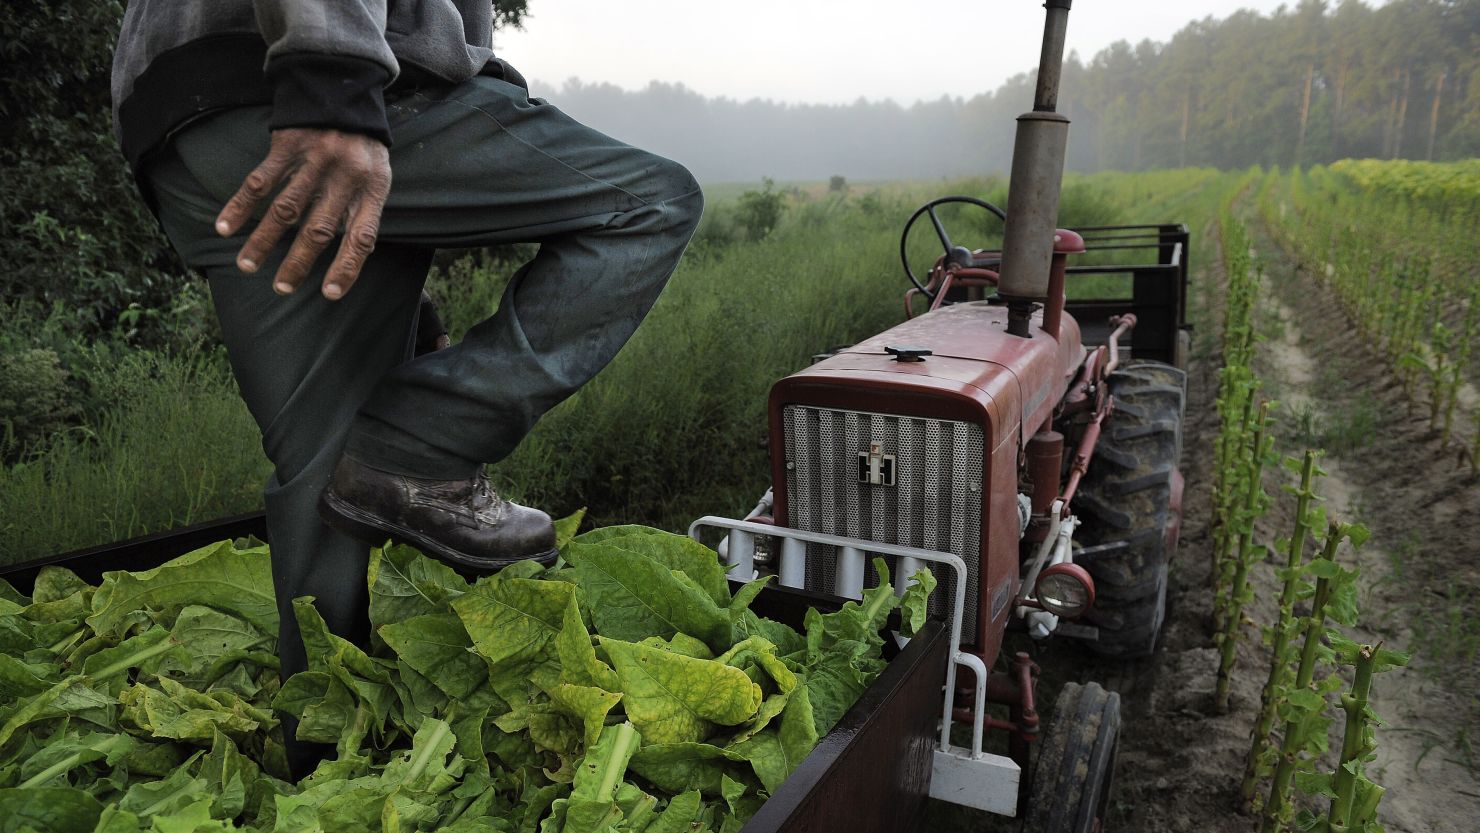 Farmer steps on tobacco in a cart in a field on Friday August 30, 2013 in Warfield, VA.  